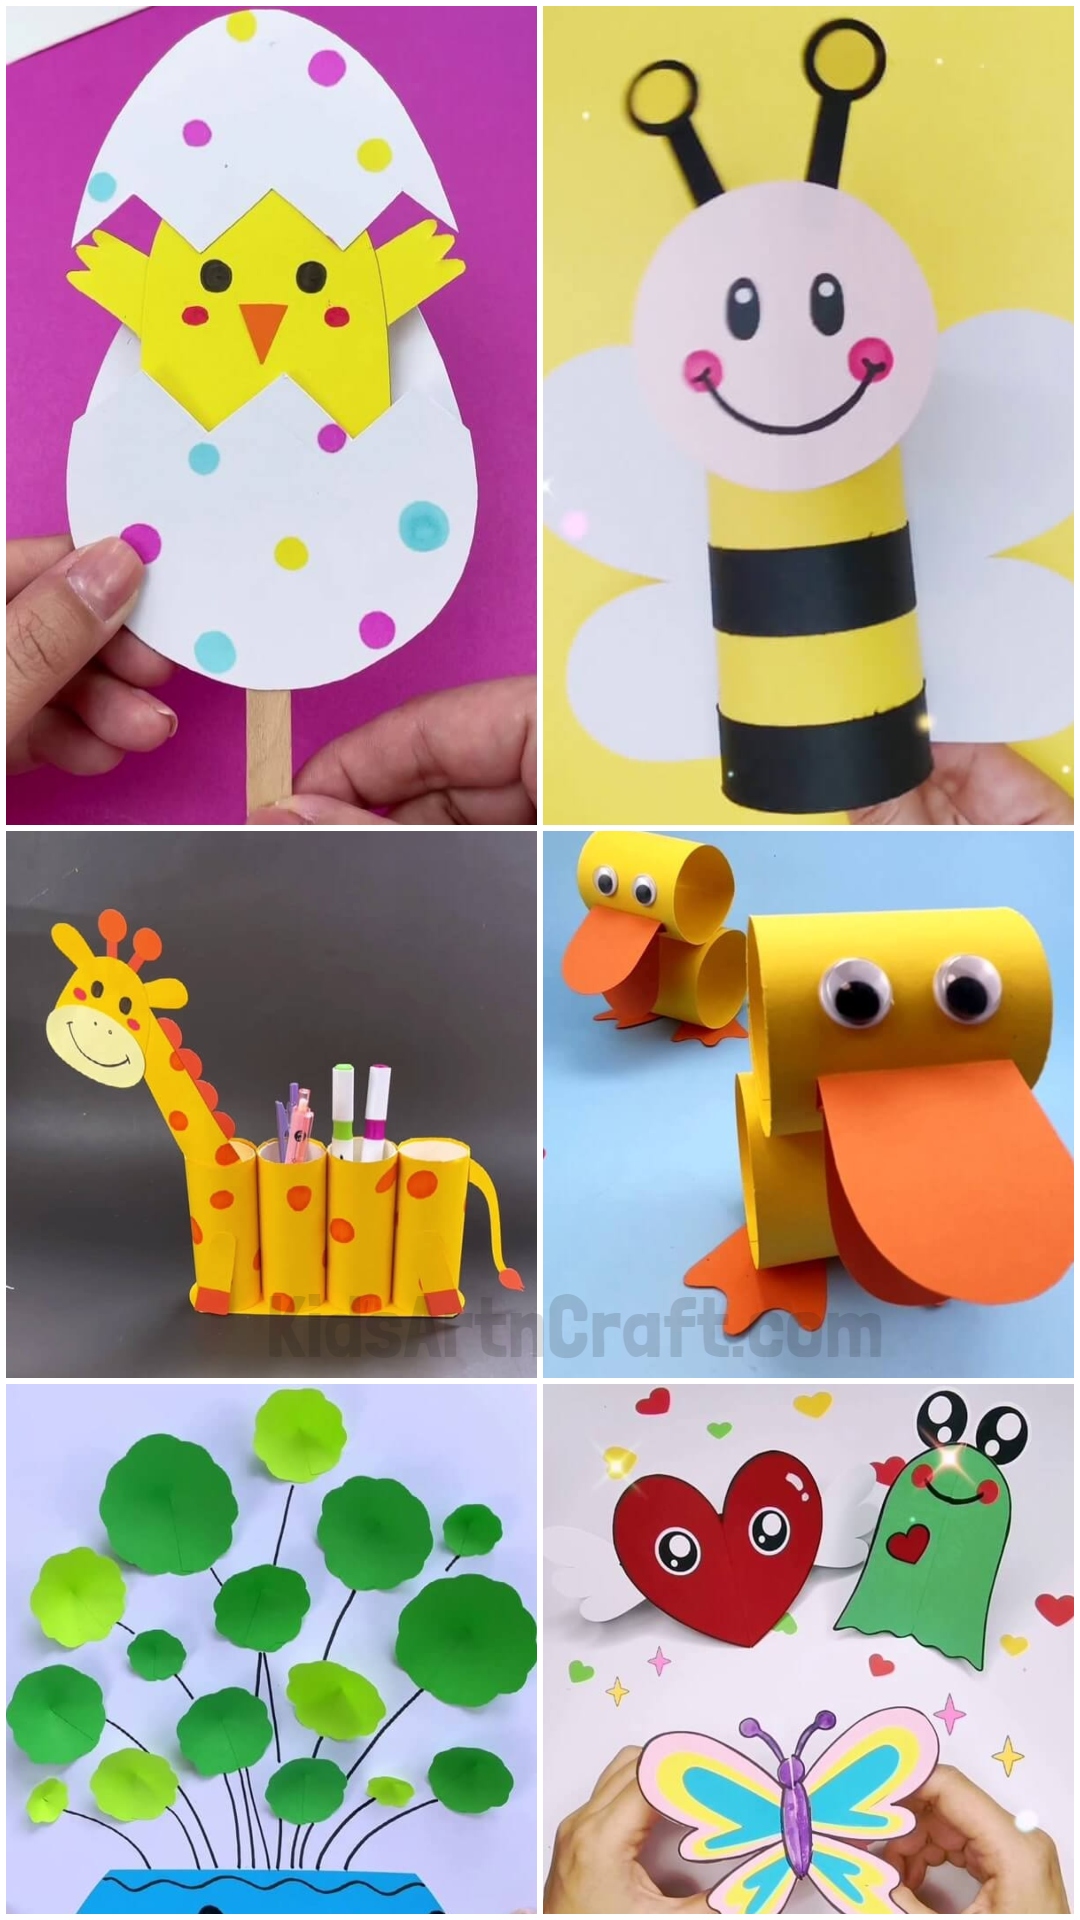 Paper Craft Activities for Kids at Home